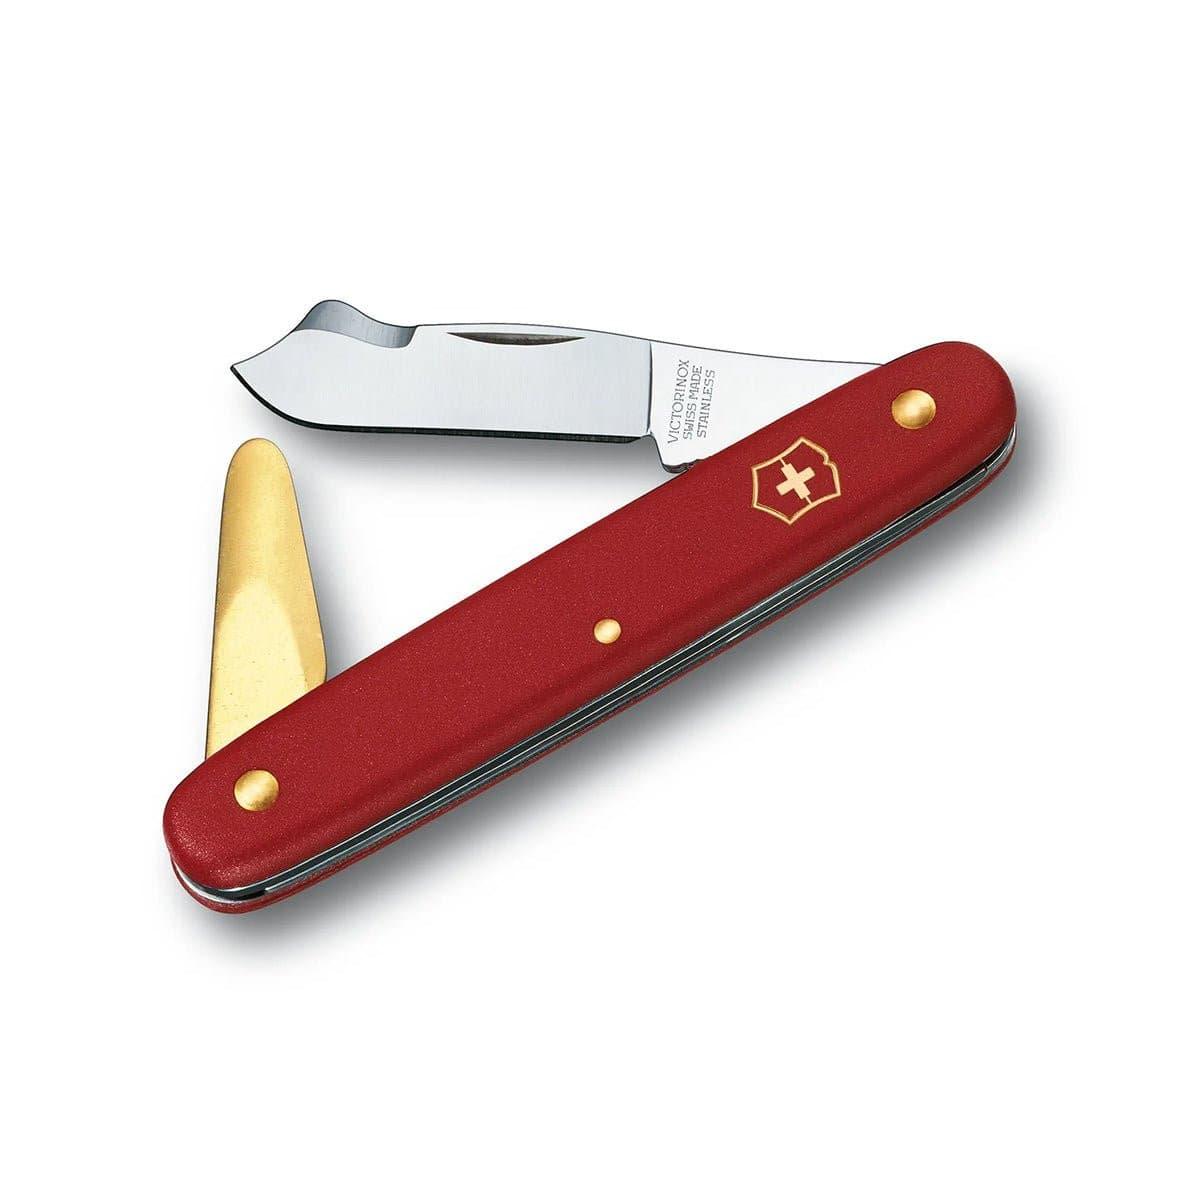 Victorinox Budding Knife - Red - 2 Blades - Knife Store